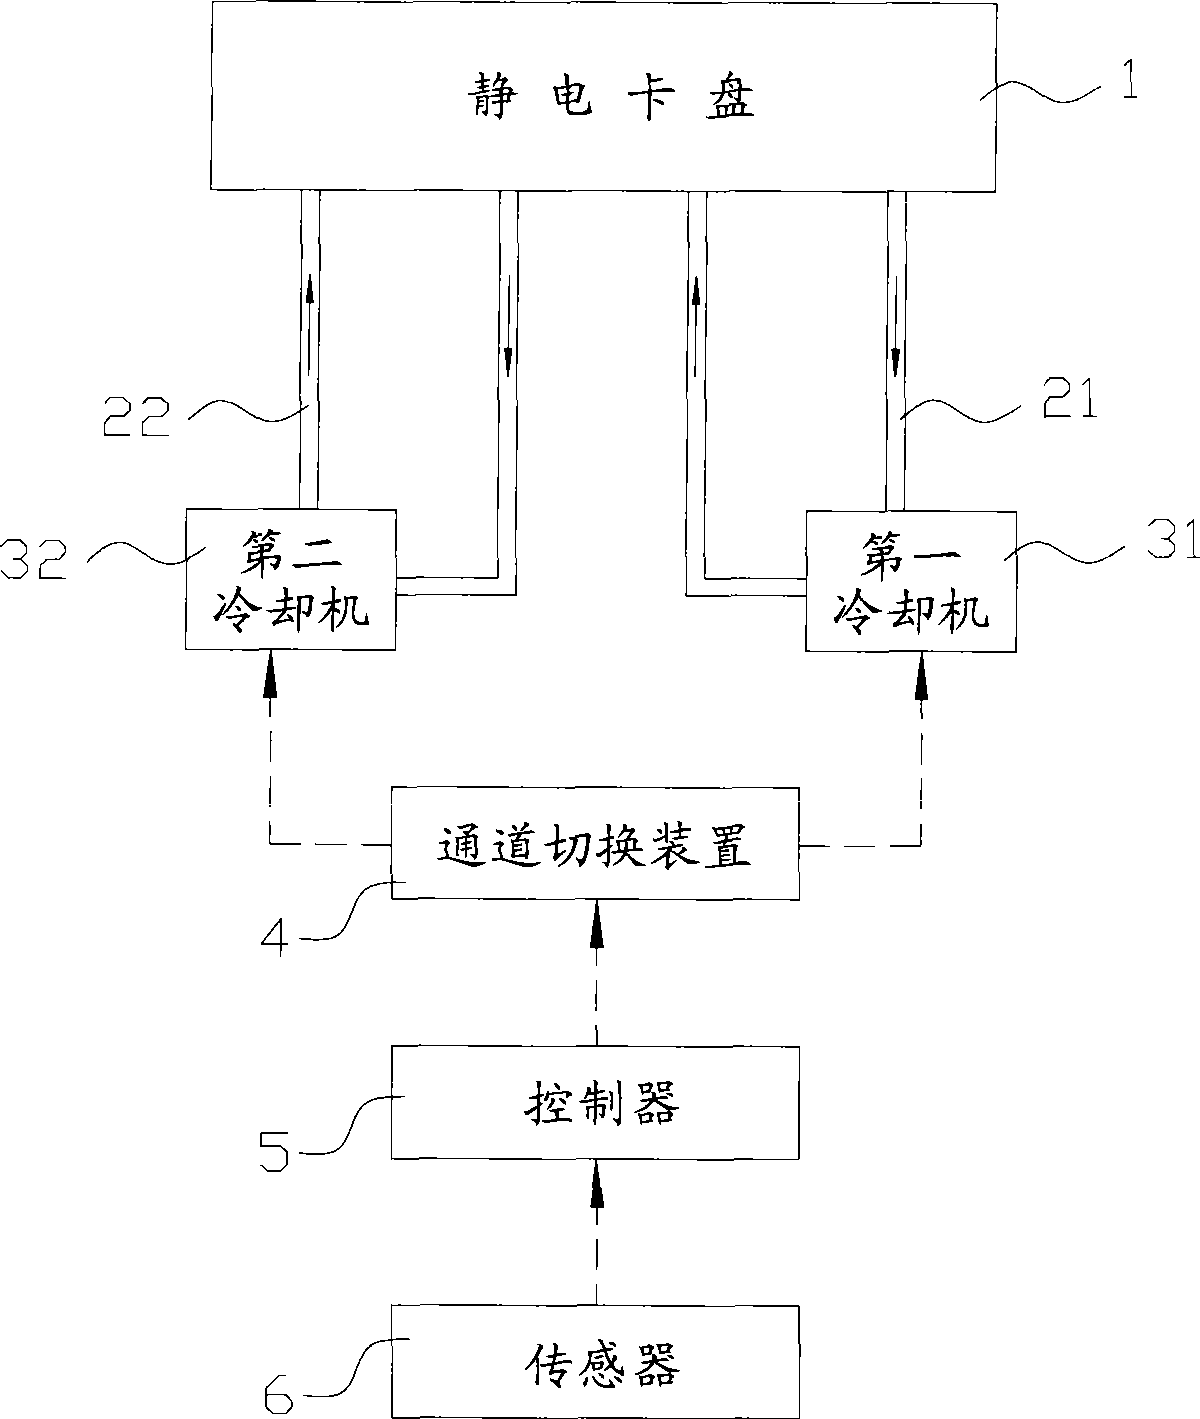 Electrostatic chuck apparatus and temperature control method thereof